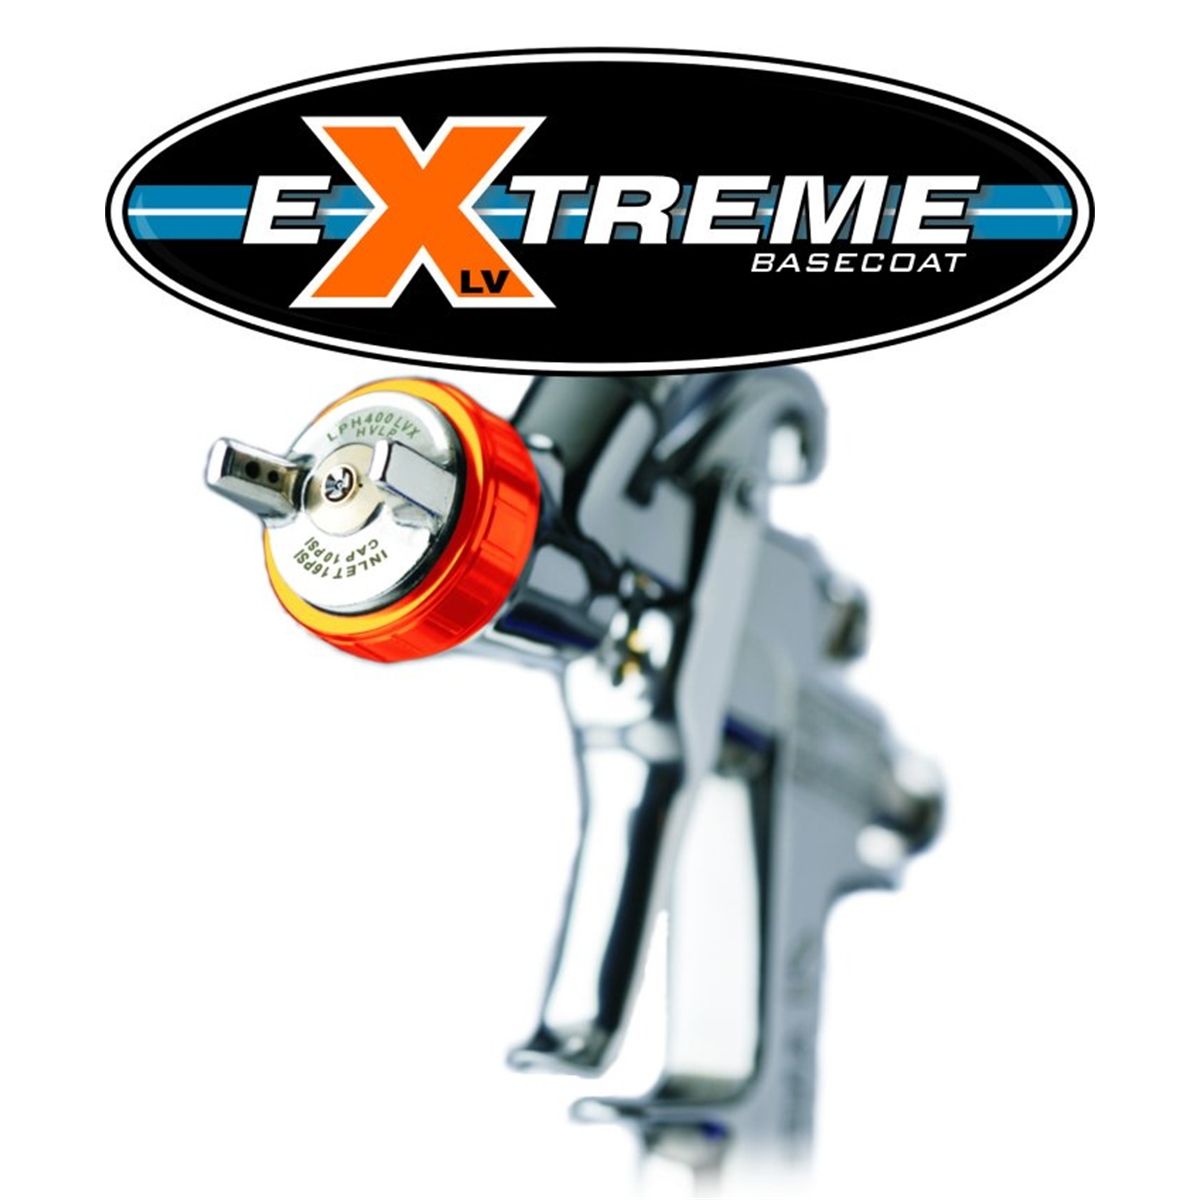 LPH400-134LVX Extreme Basecoat Spray Gun with 700 ml Cup